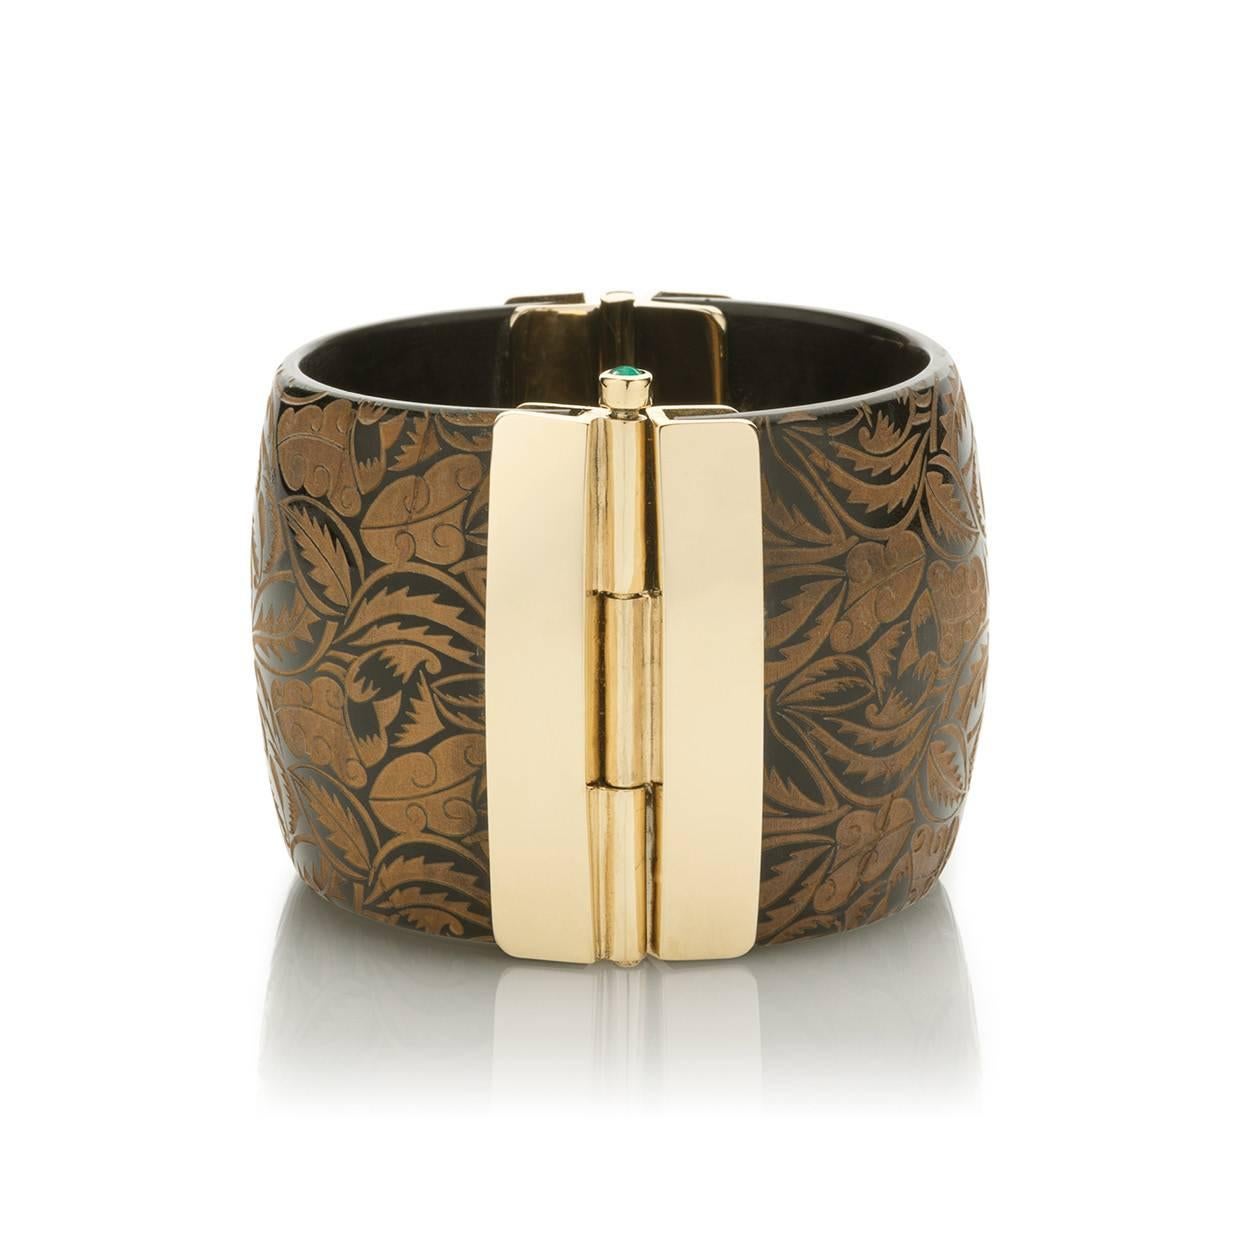 This unique cuff is hand crafted from African cow horn; engraving inspired by Fauvist textiles of 1900s Paris. The intricate pin-clasp is set with the finest emerald sourced from conflict-free mines in Zambia.  

This unique cuff bracelet is hand